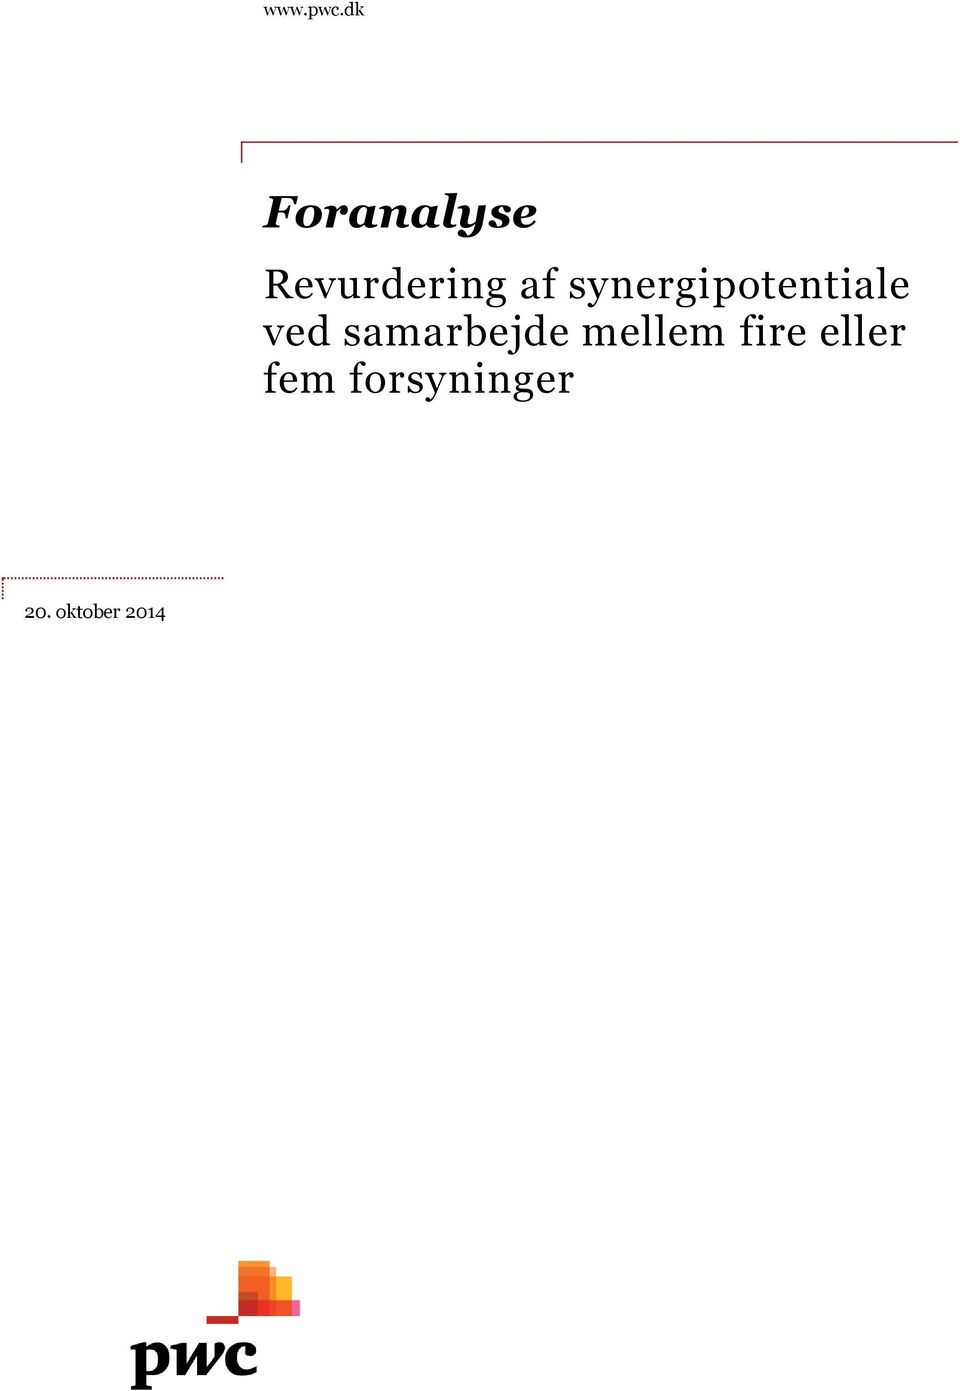 synergipotentiale ved